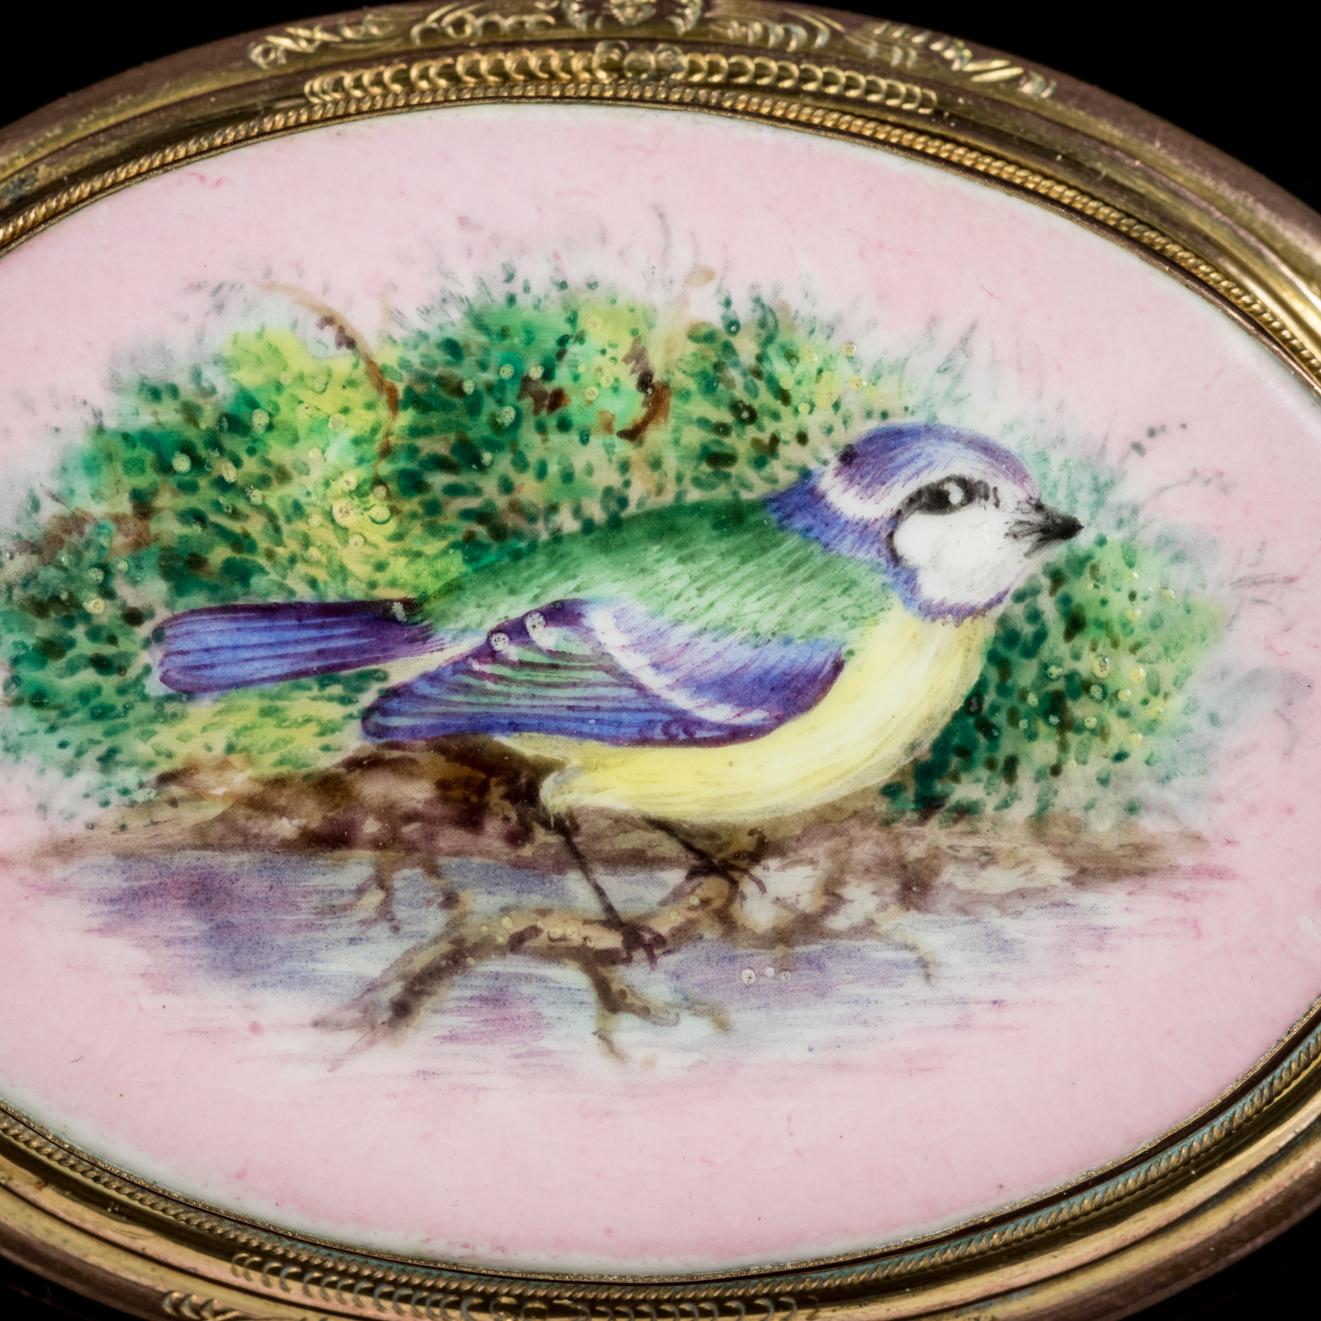 This wonderful antique hand painted Blue Tit brooch is Victorian, Circa 1890.

The lovely Blue Tit sits perched on a branch above a running river with rich green bushes painted onto a pretty pink back drop.

Victorian jewellery mirrored Queen